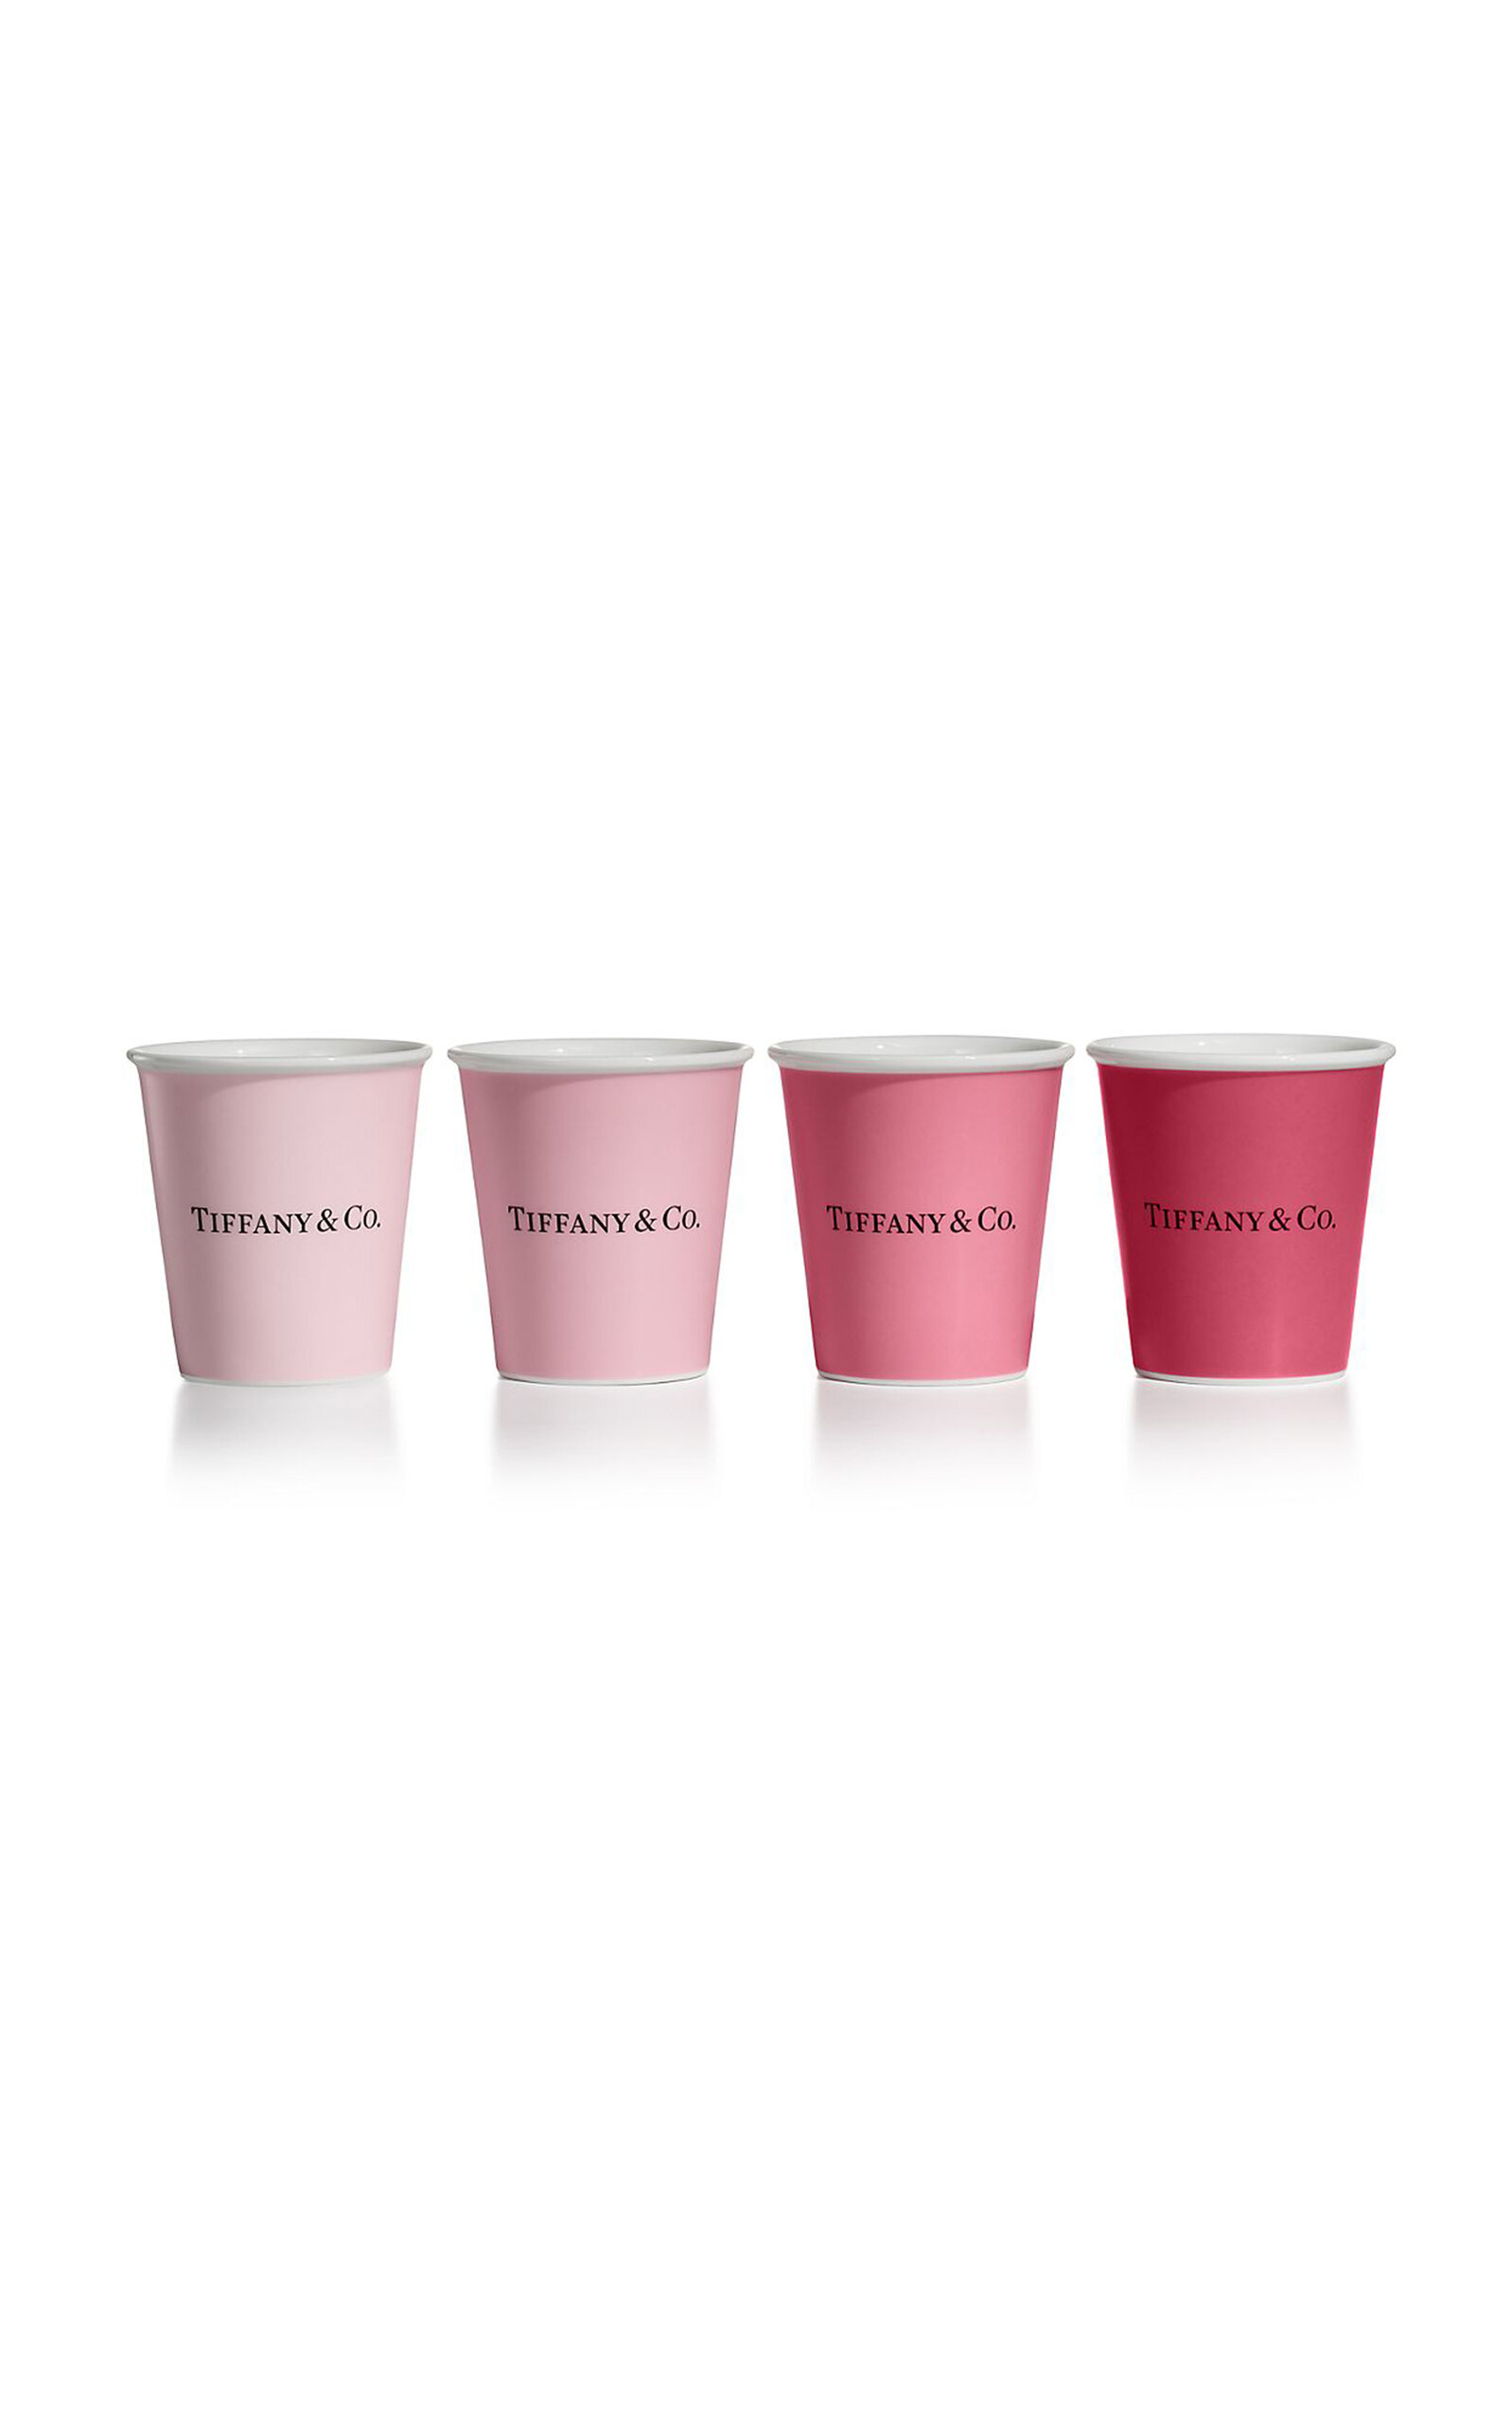 Tiffany & Co Set-of-four Bone China Coffee Cups In Pink